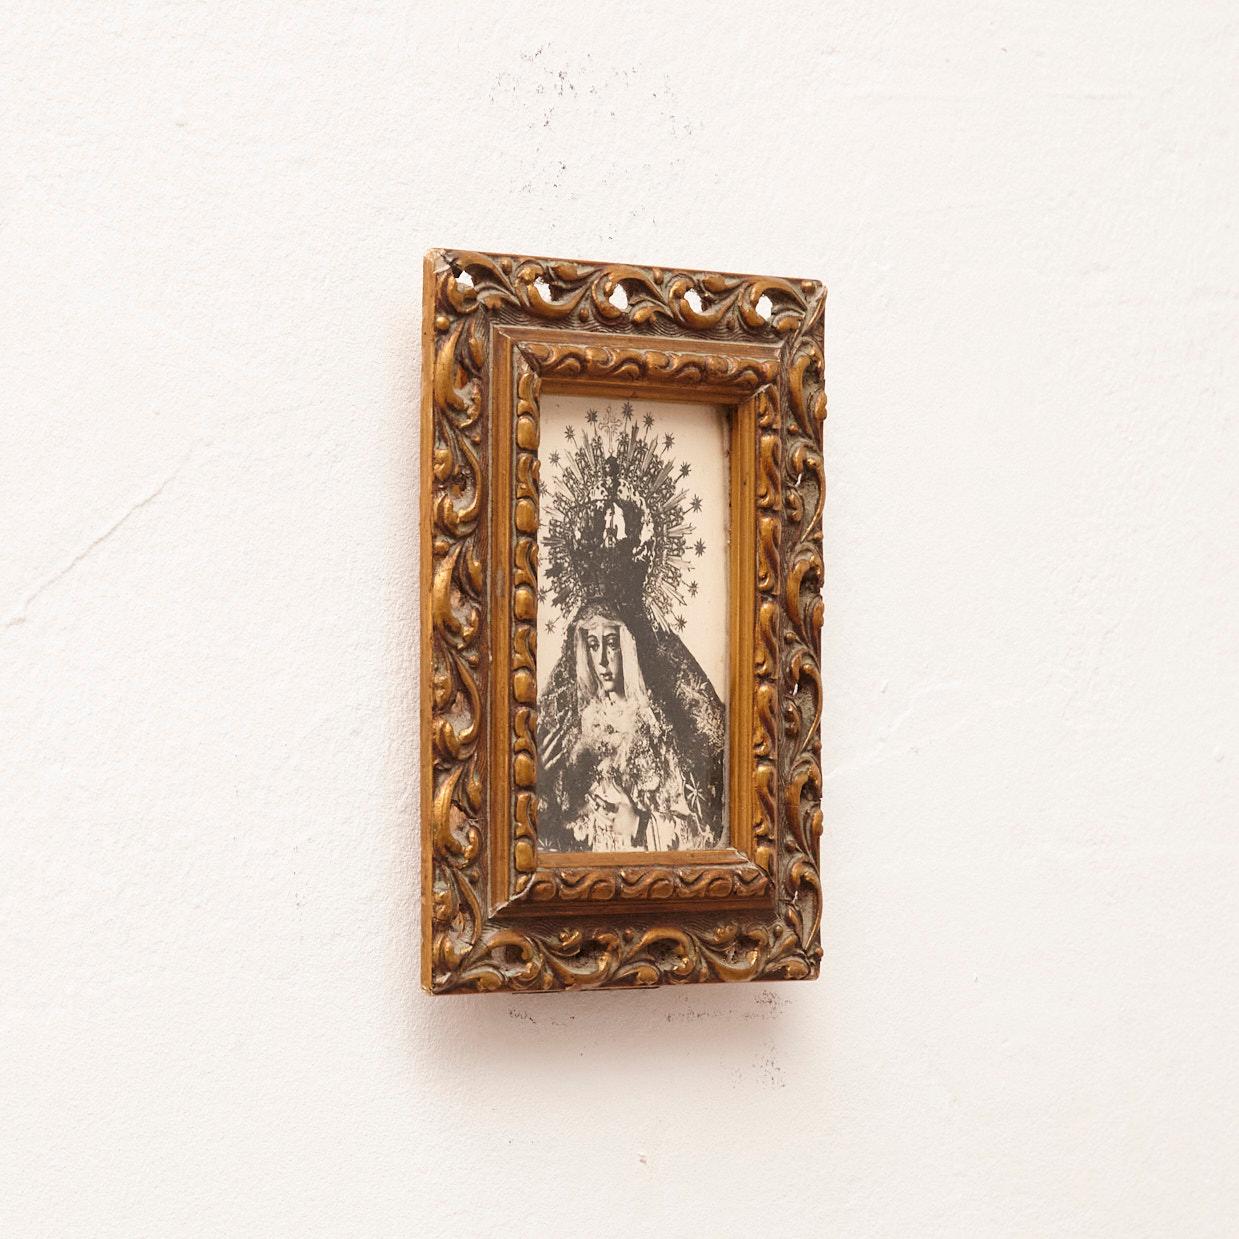 Framed Virgin Image, circa 1950 

Manufactured in France.

Materials:
Wood, paper.

Dimensions: 
D 3 x W 15,2 cm x H 20,2 cm

The artwork is in its original condition, showing minor signs of wear consistent with its age and use. These imperfections